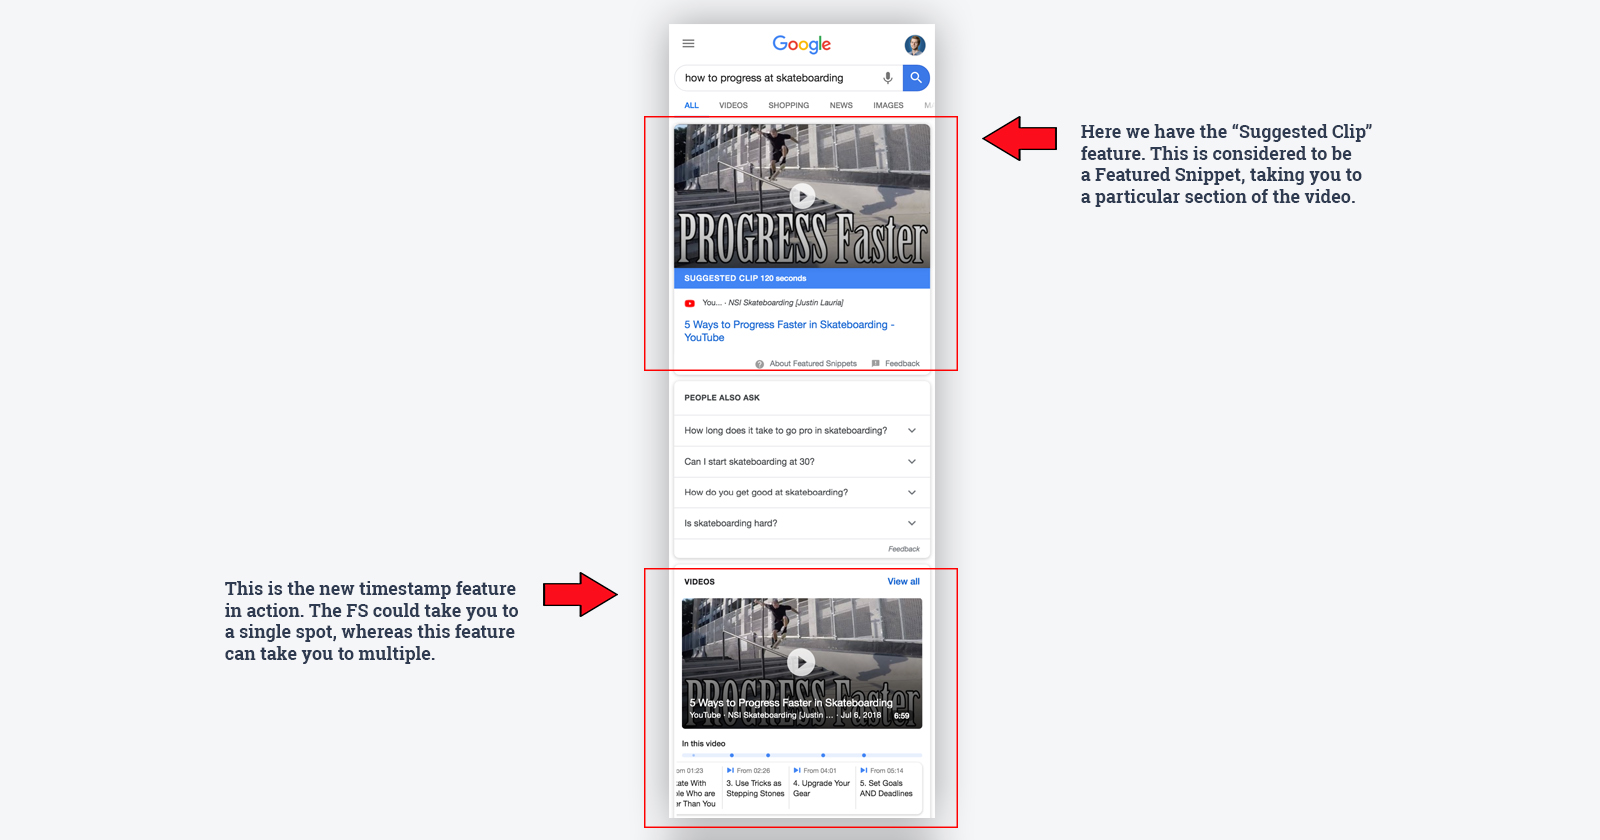 suggested clip with featured snippet vs key moments